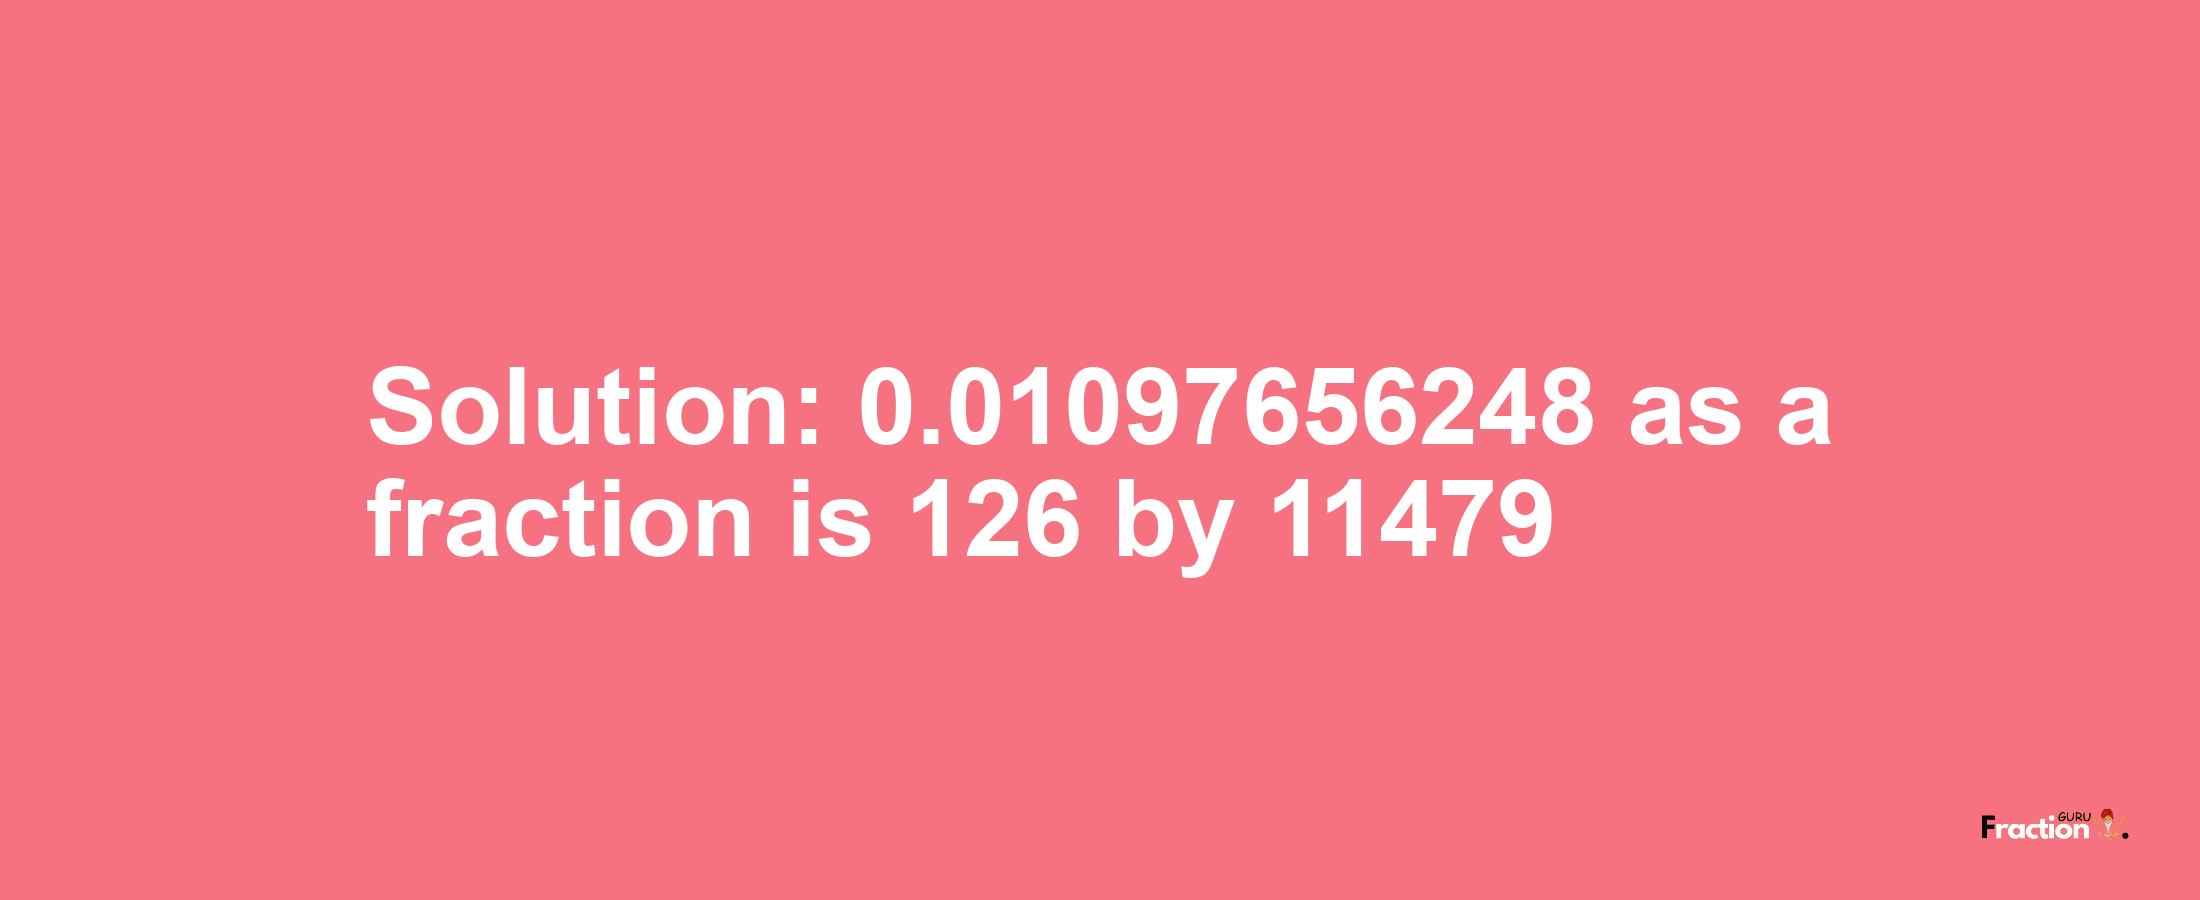 Solution:0.01097656248 as a fraction is 126/11479